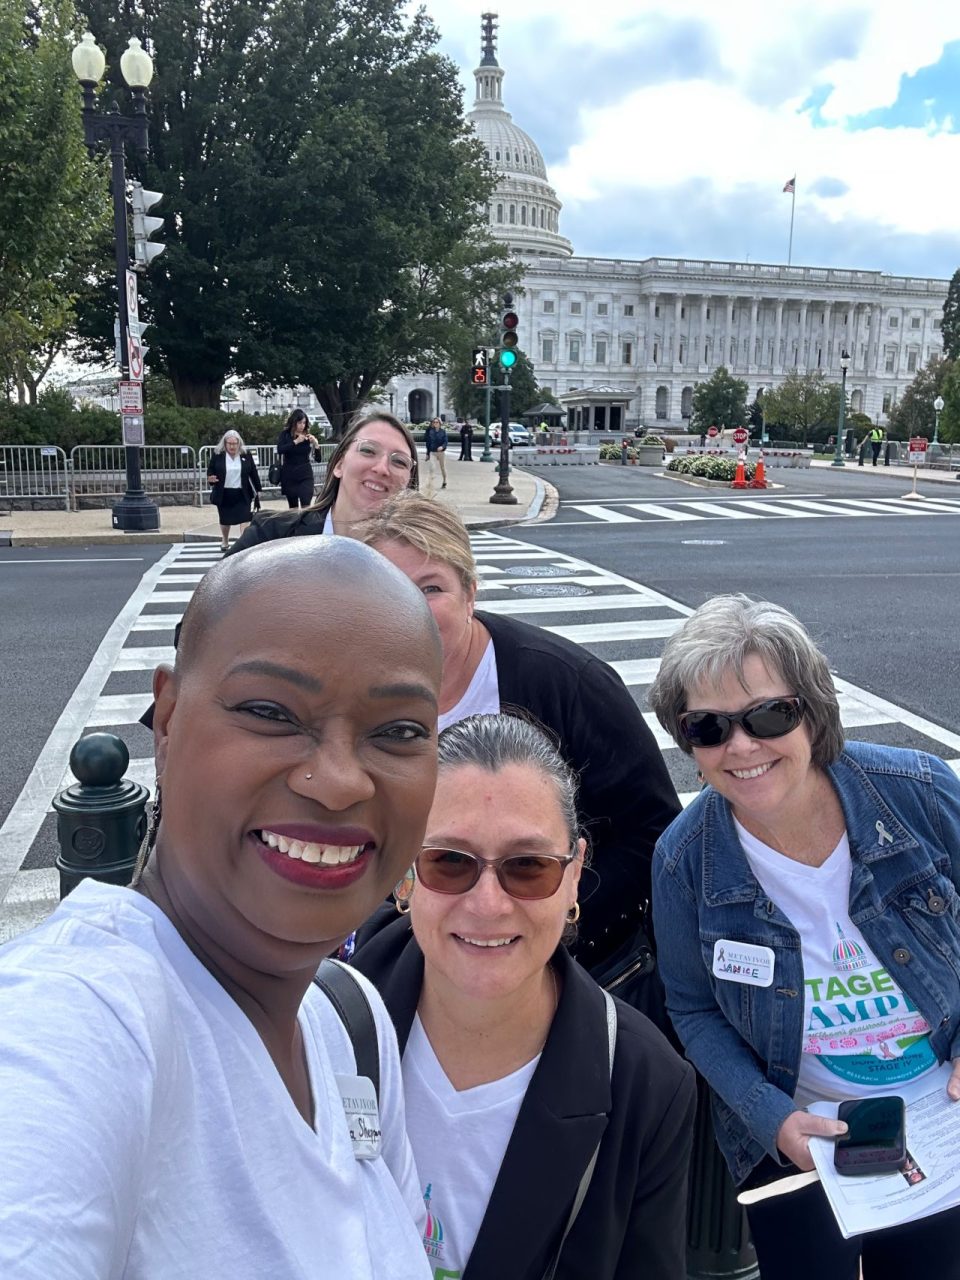 Janice Cowden: We marched on Capitol Hill with Metavivor Research and Support Inc. to advocate for increased funding for Metastatic Breast Cancer